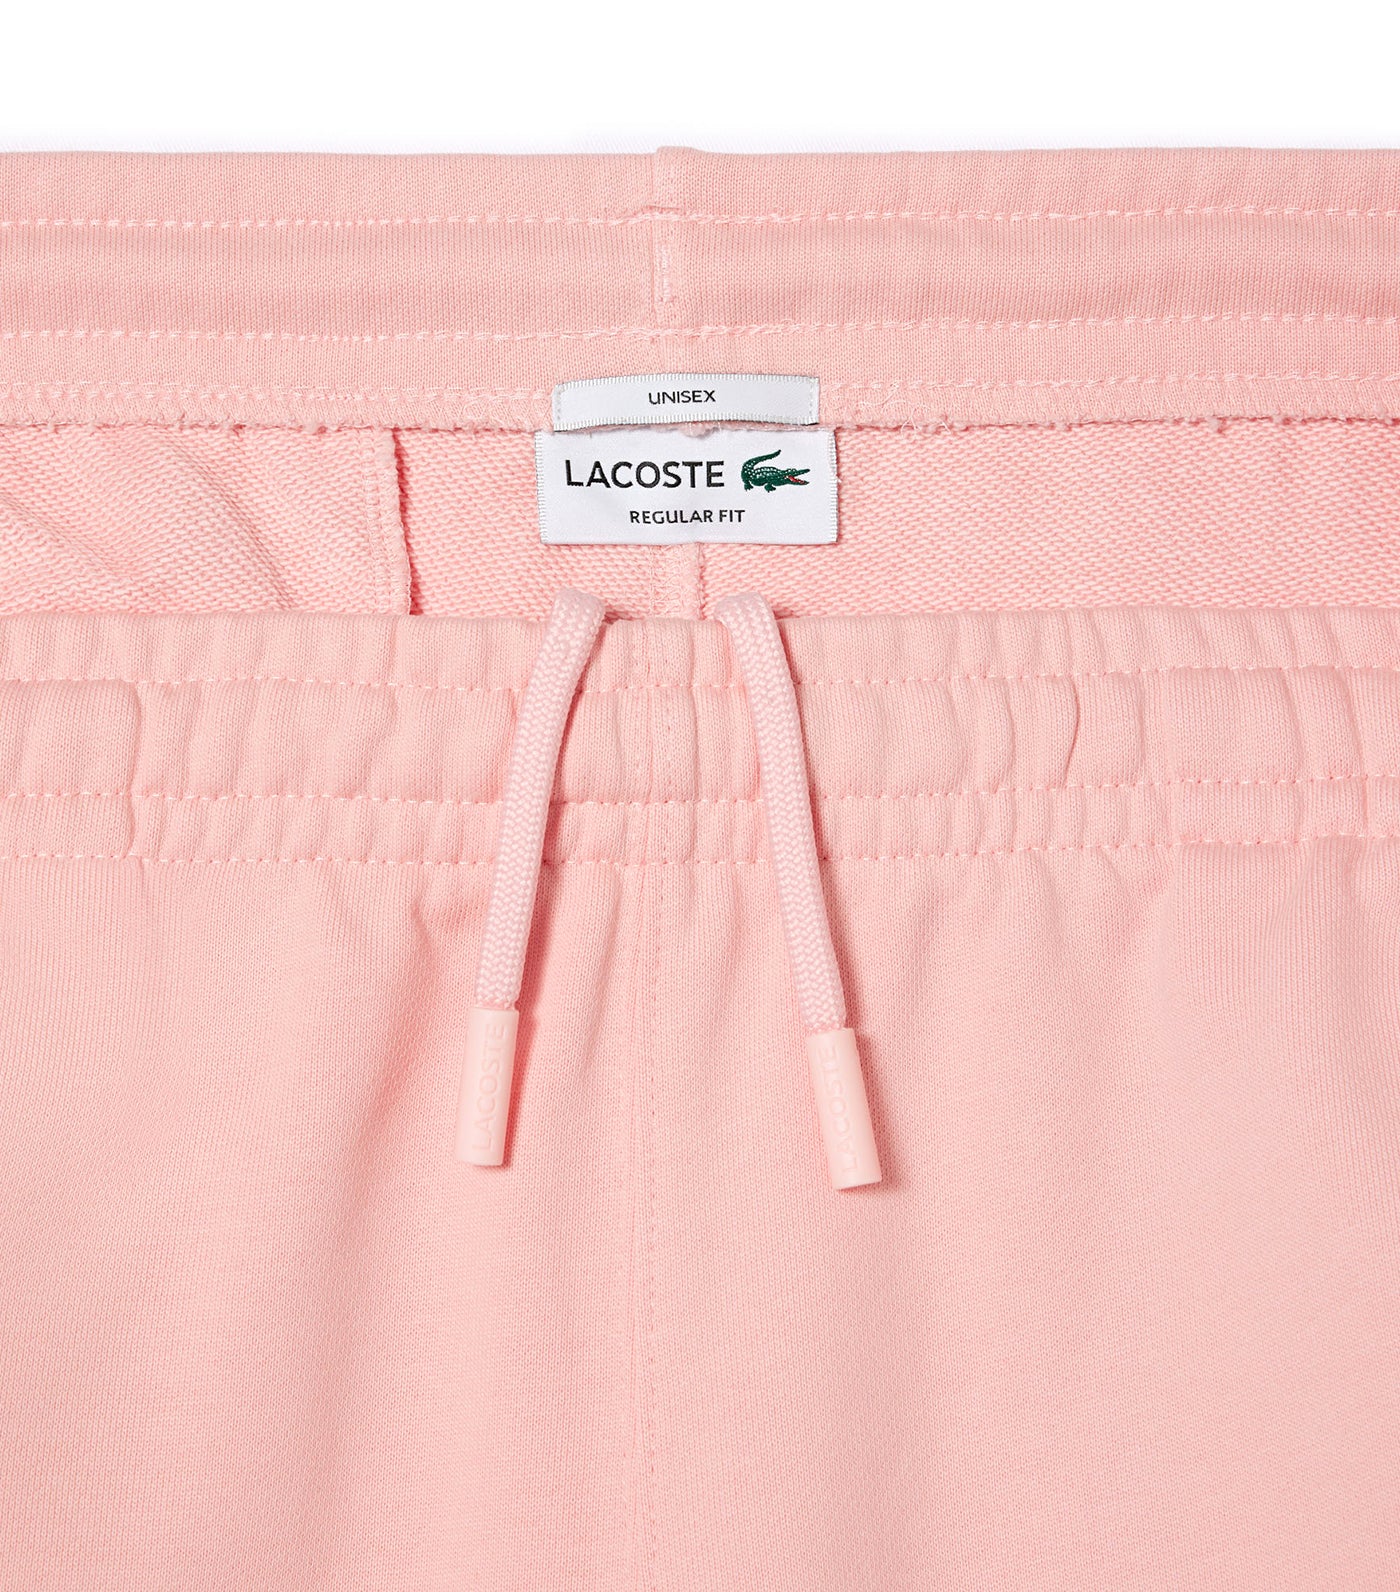 Lacoste Signature Print Jogger Shorts Waterlily